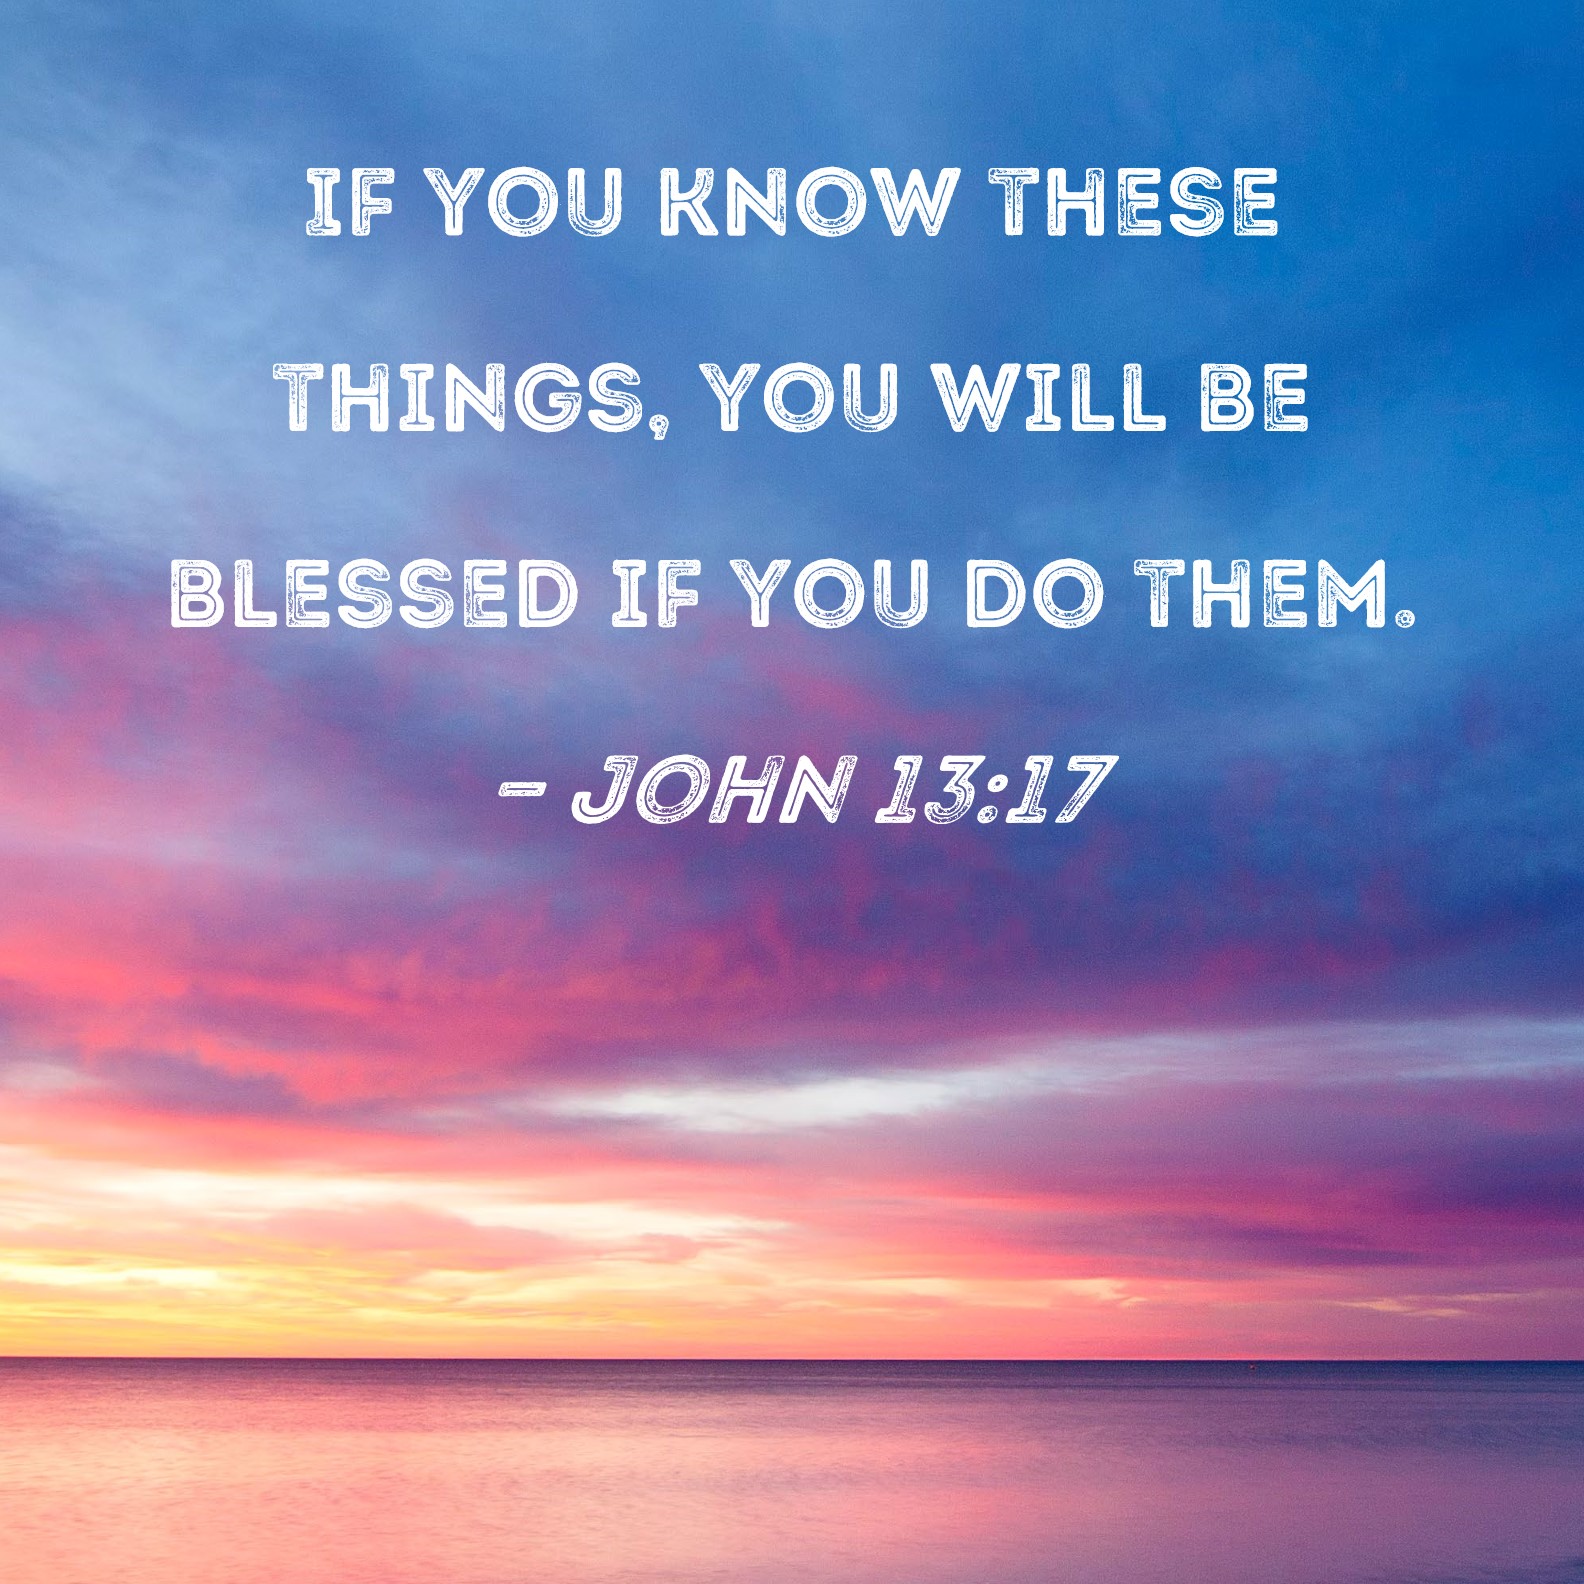 John 13:17 If you know these things, you will be blessed if you do them.